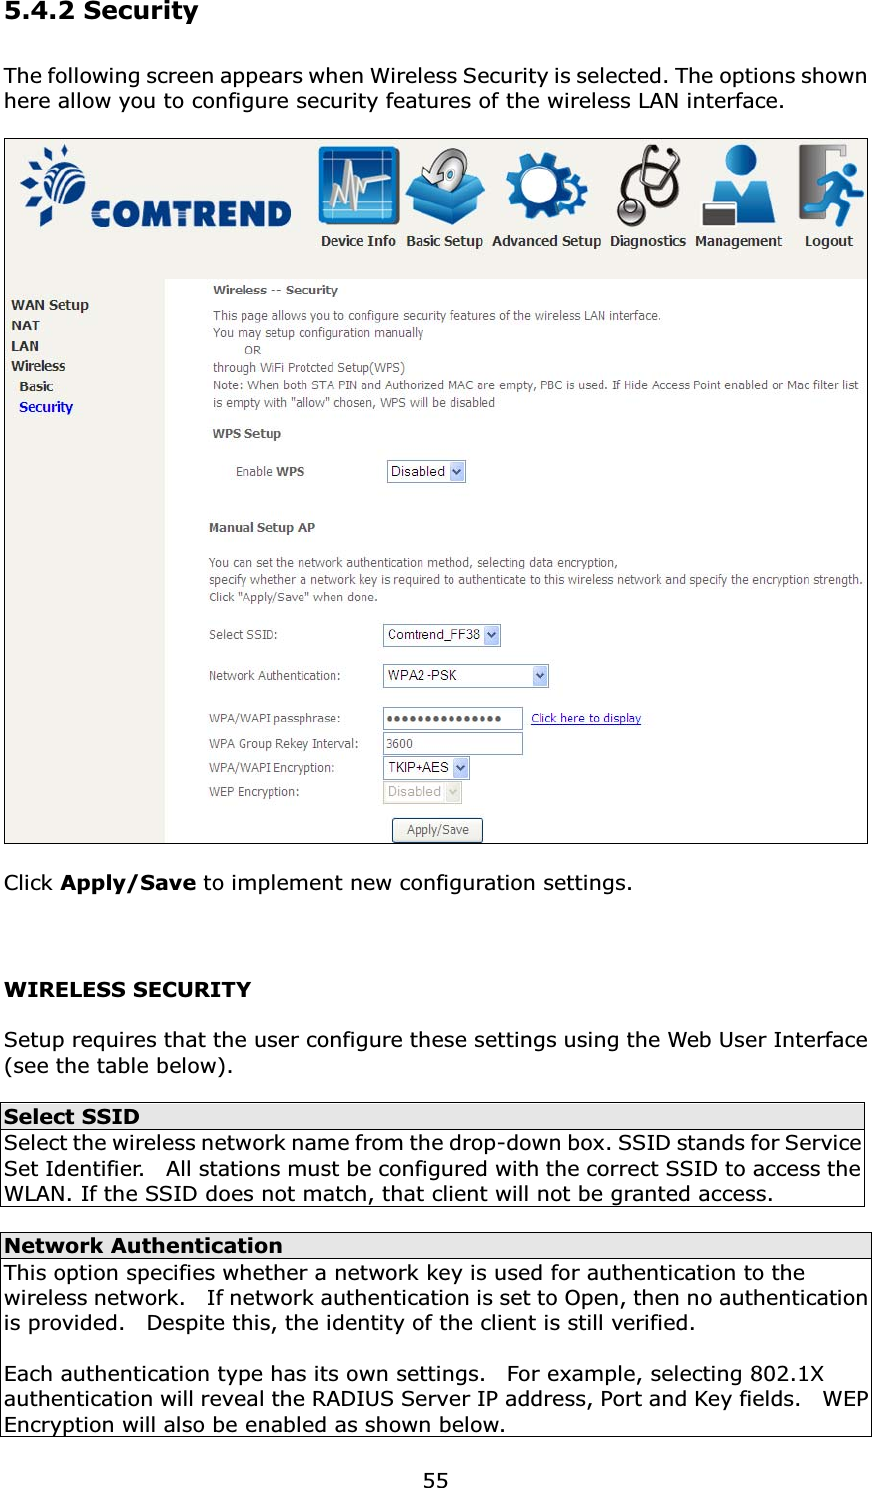 555.4.2 SecurityThe following screen appears when Wireless Security is selected. The options shown here allow you to configure security features of the wireless LAN interface.Click Apply/Save to implement new configuration settings.WIRELESS SECURITYSetup requires that the user configure these settings using the Web User Interface(see the table below).Select SSIDSelect the wireless network name from the drop-down box. SSID stands for Service Set Identifier.    All stations must be configured with the correct SSID to access the WLAN. If the SSID does not match, that client will not be granted access.Network AuthenticationThis option specifies whether a network key is used for authentication to the wireless network.    If network authentication is set to Open, then no authentication is provided.    Despite this, the identity of the client is still verified.   Each authentication type has its own settings.    For example, selecting 802.1X authentication will reveal the RADIUS Server IP address, Port and Key fields.    WEP Encryption will also be enabled as shown below.